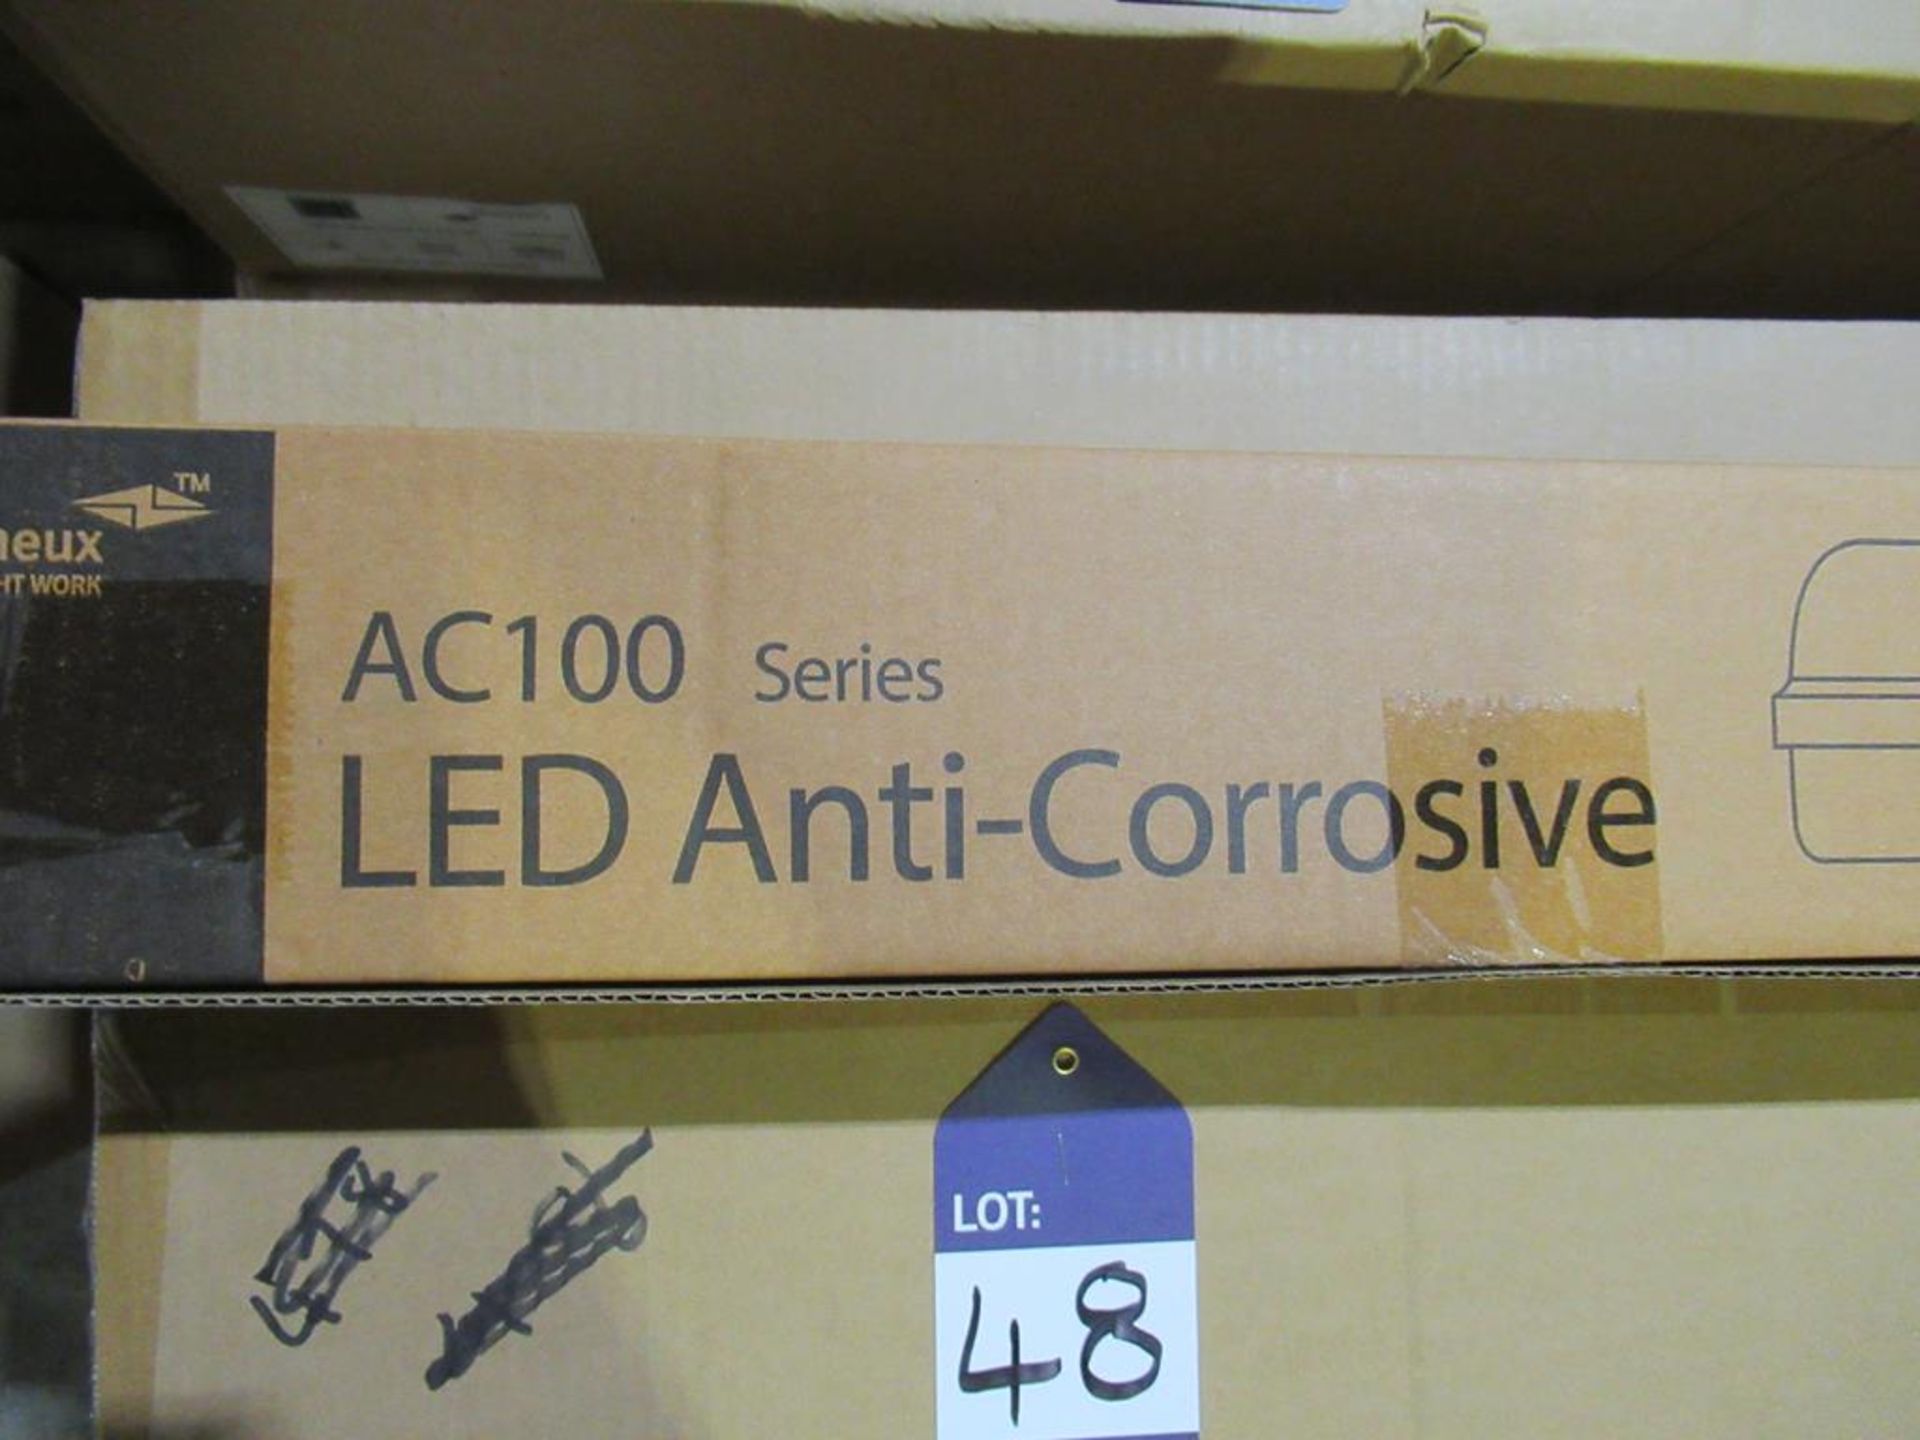 18 x LED 5ft Anti-Corrosive 35W 5000K Single with Tridonic Drivers OEM Trade Price £324 - Image 2 of 4